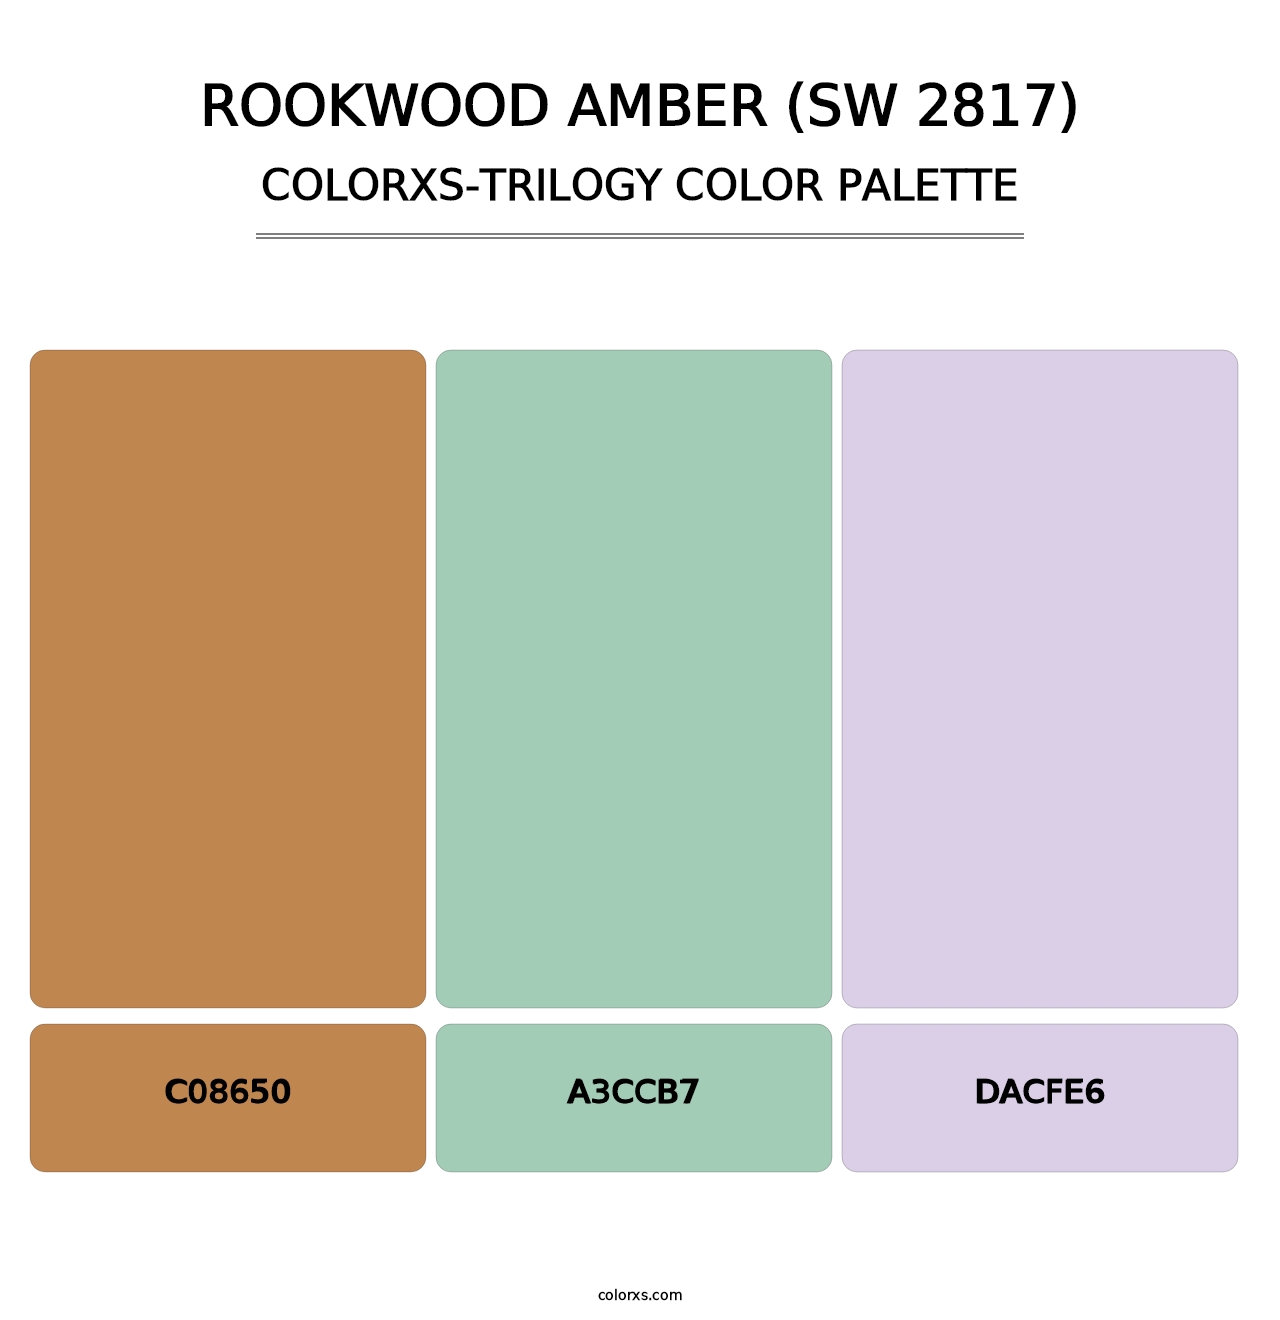 Rookwood Amber (SW 2817) - Colorxs Trilogy Palette